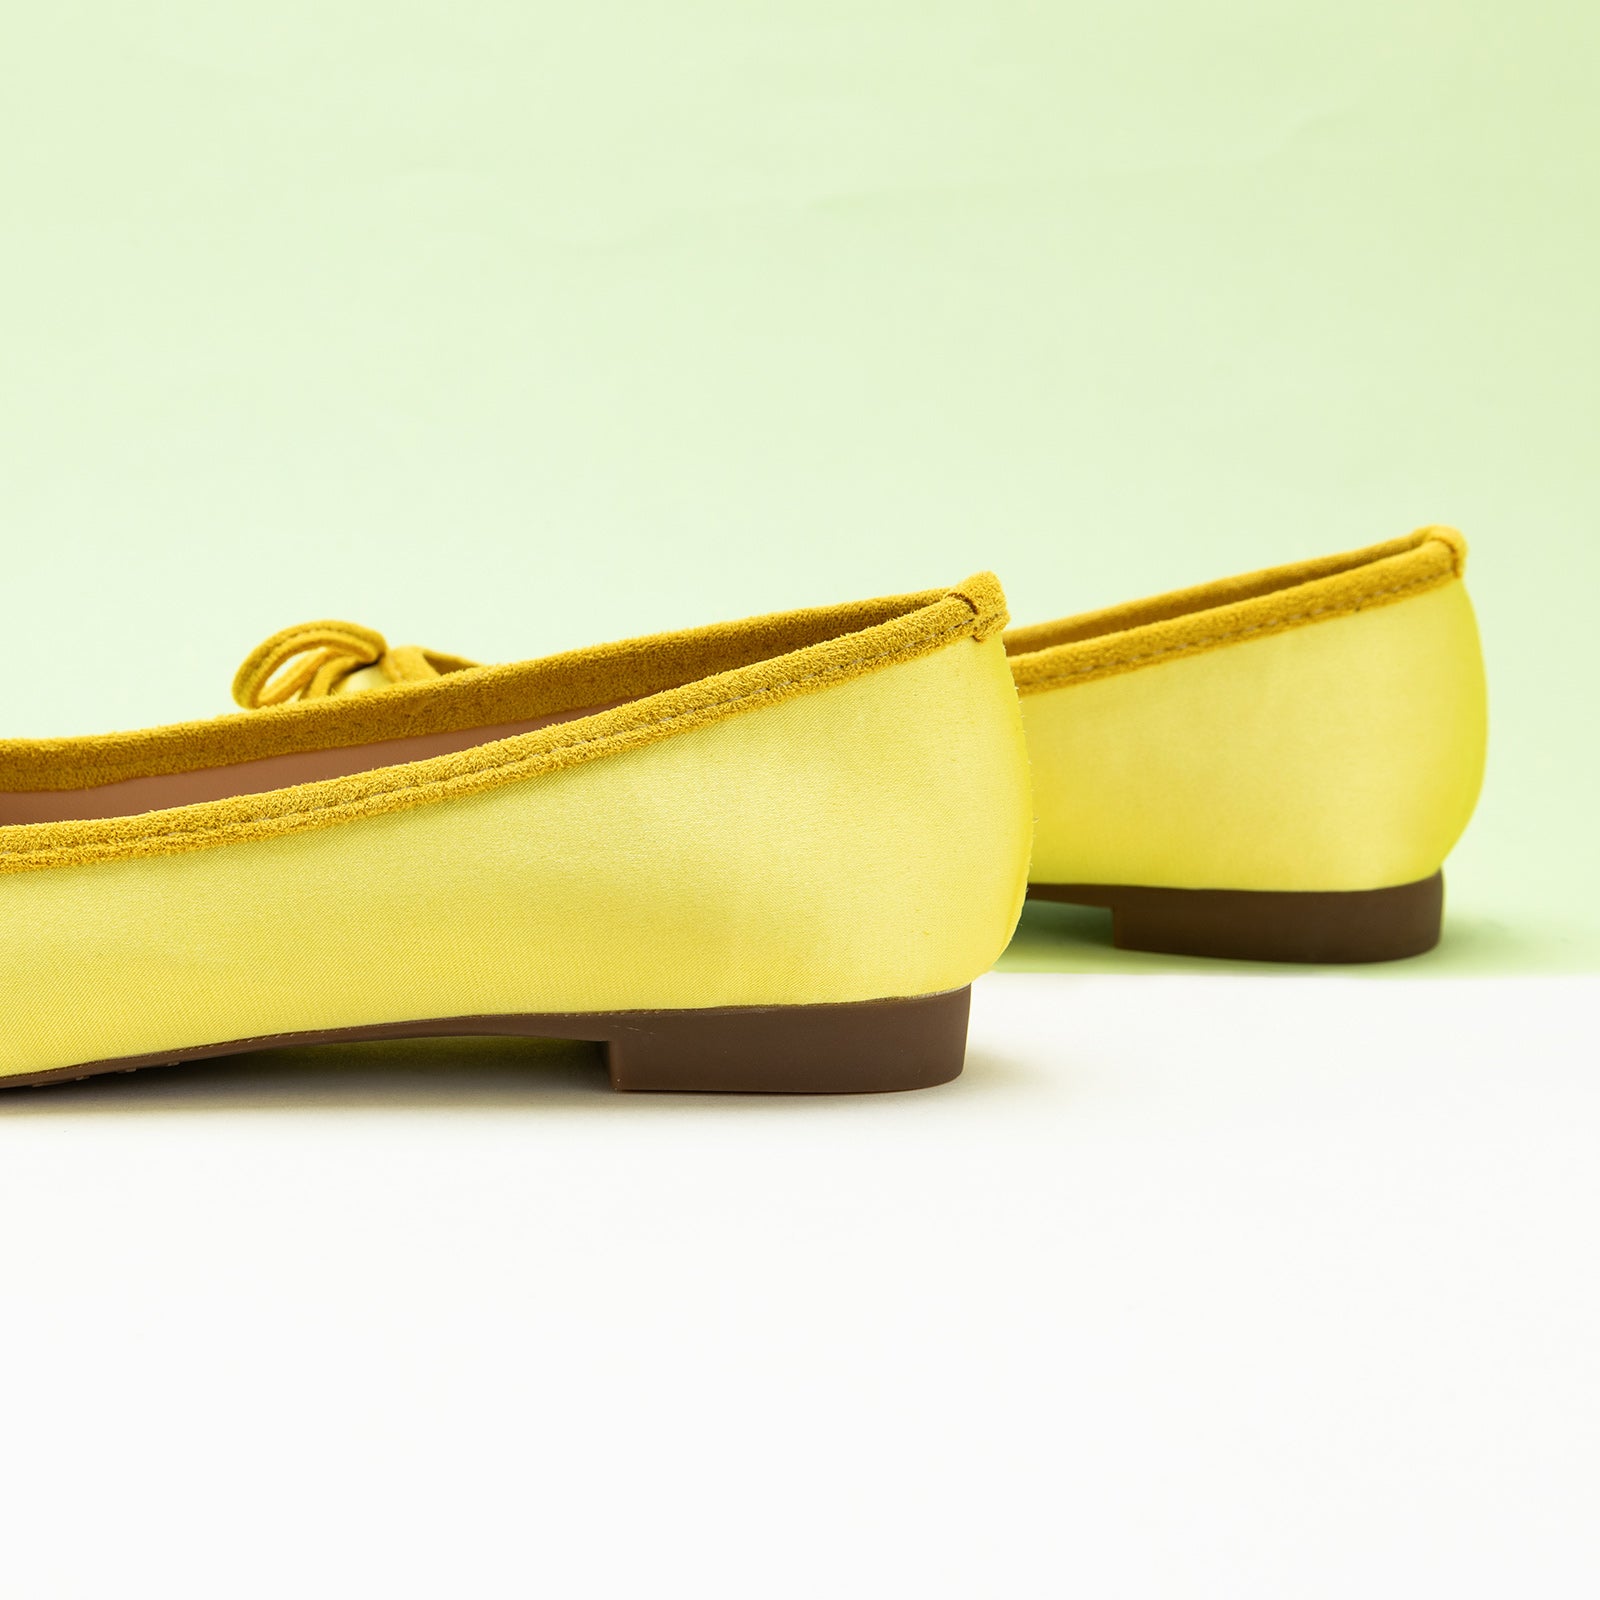  Silky Bowknot Ballet Flats in Yellow, featuring delicate details for a polished and radiant style